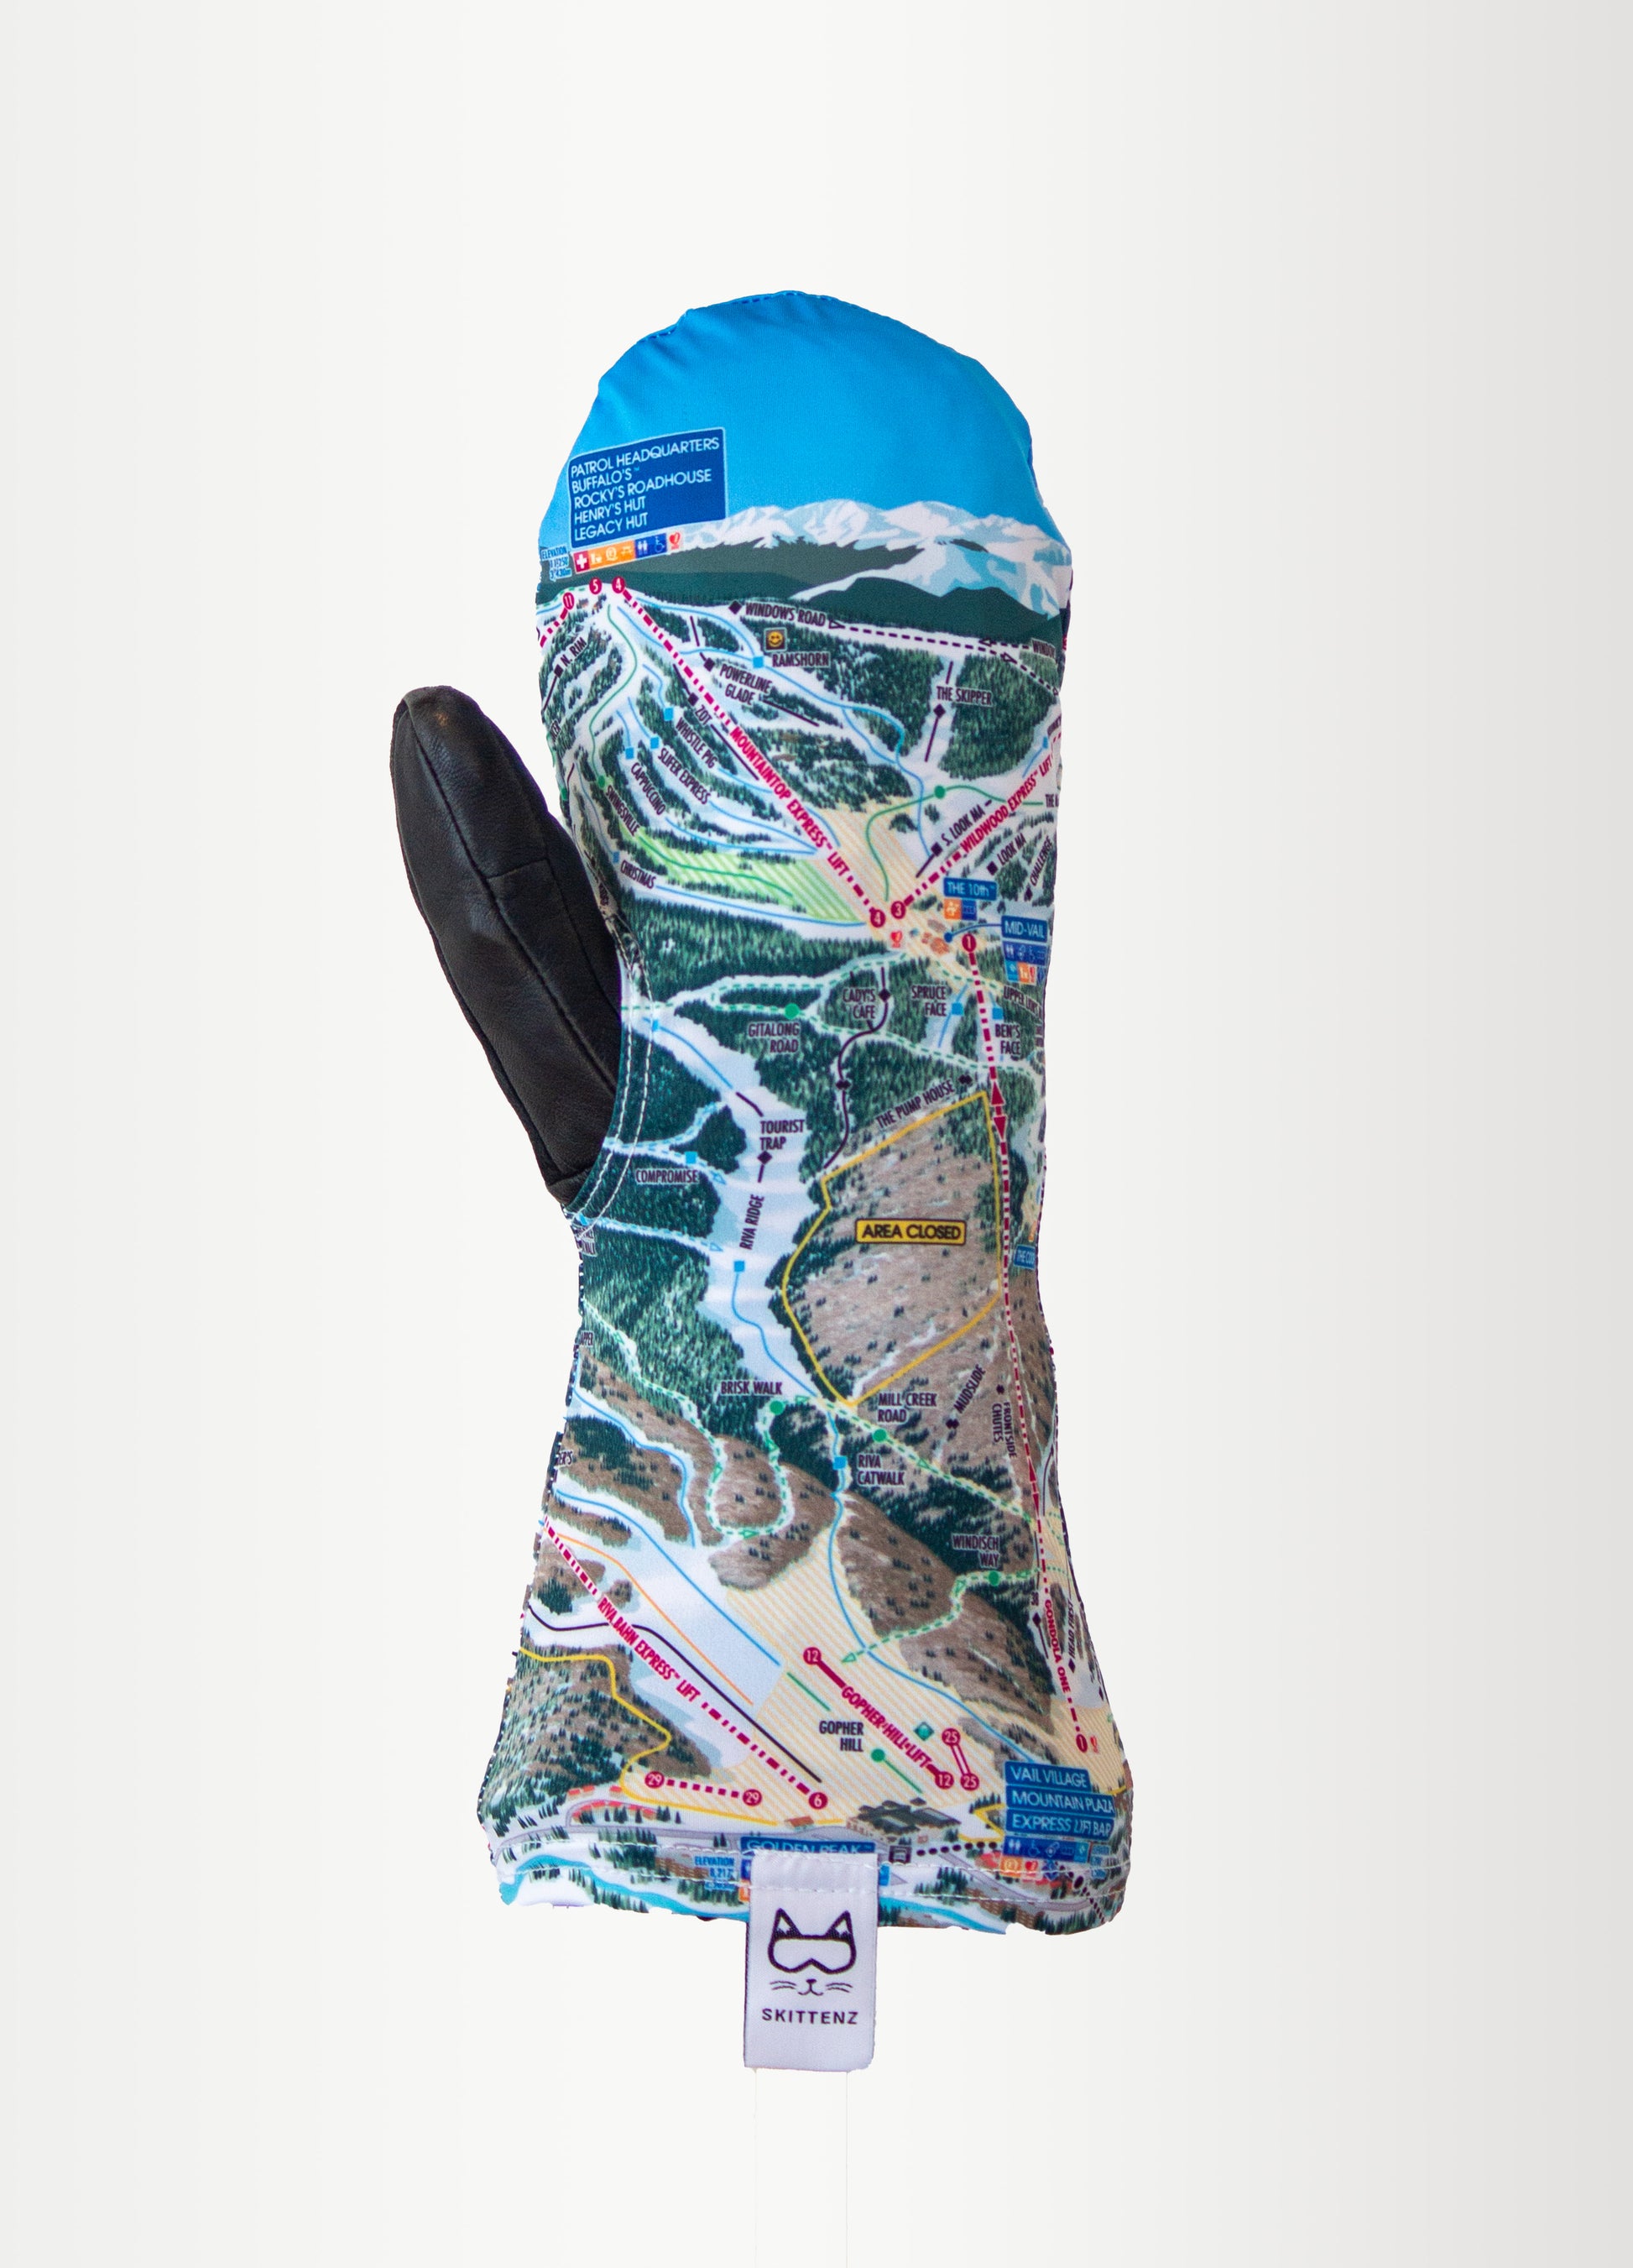 Vail Ski or Snowboard Trail Map Skins for Mittens or Gloves